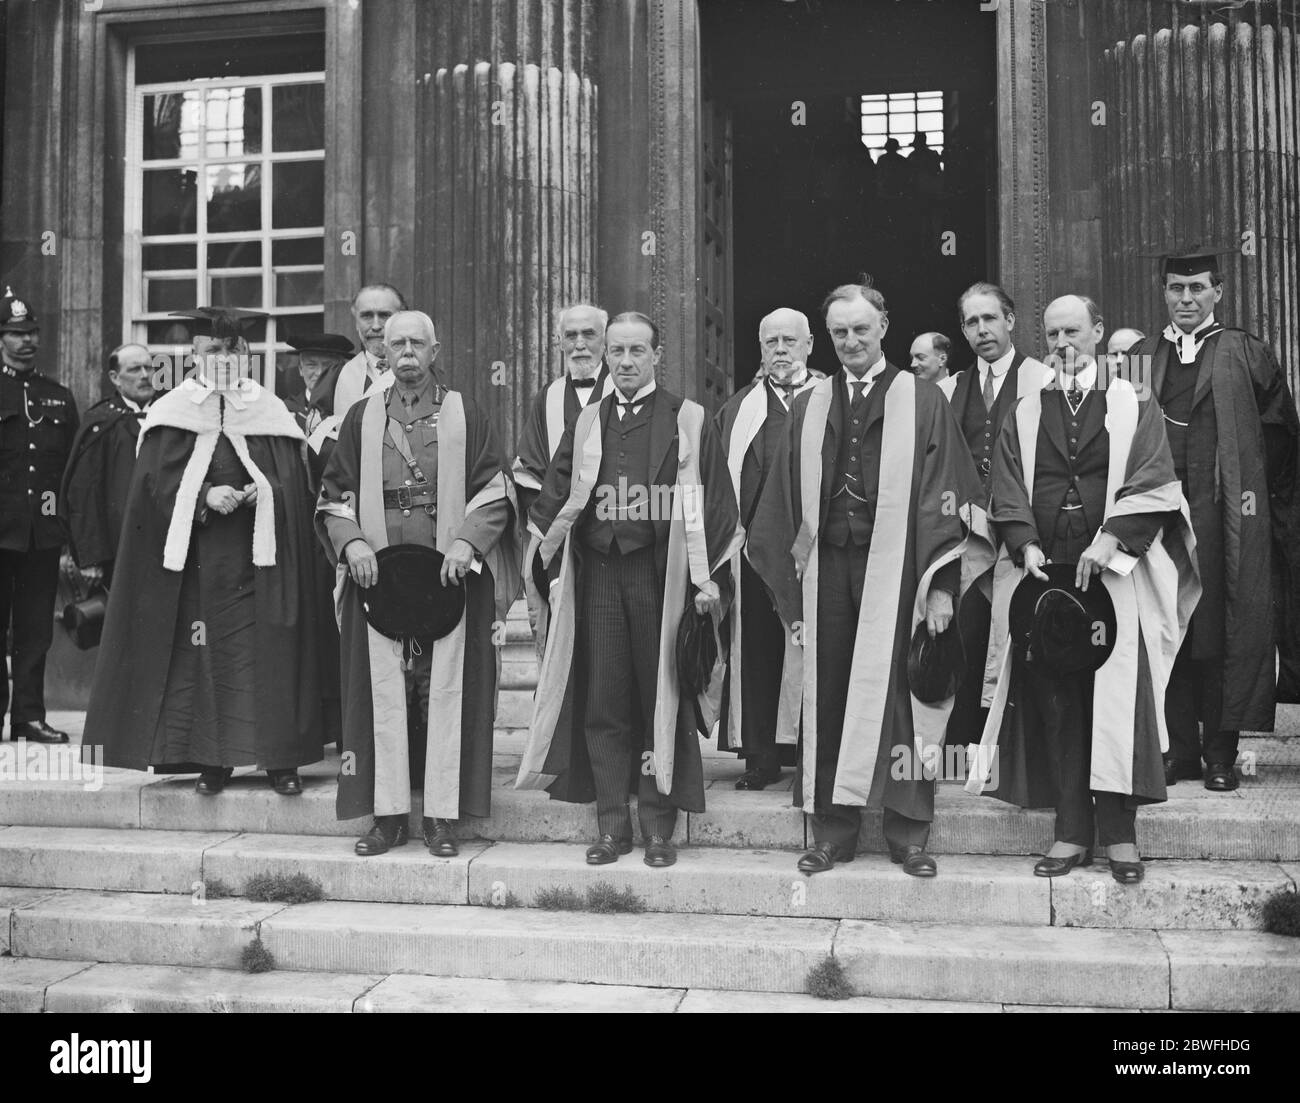 Cambridge University Honours Premier Honorary Degrees for Mr Baldwin and other celebrities Left to right the Vice Chancellor , Mr M C Norman , Lord Plumer , Prof H A Lorentz , Mr Stanley Baldwin , Dr W H Welch , Viscount Grey , Prof N Bohr , and Sir Aston Webb in their robes 12 June 1923 Stock Photo